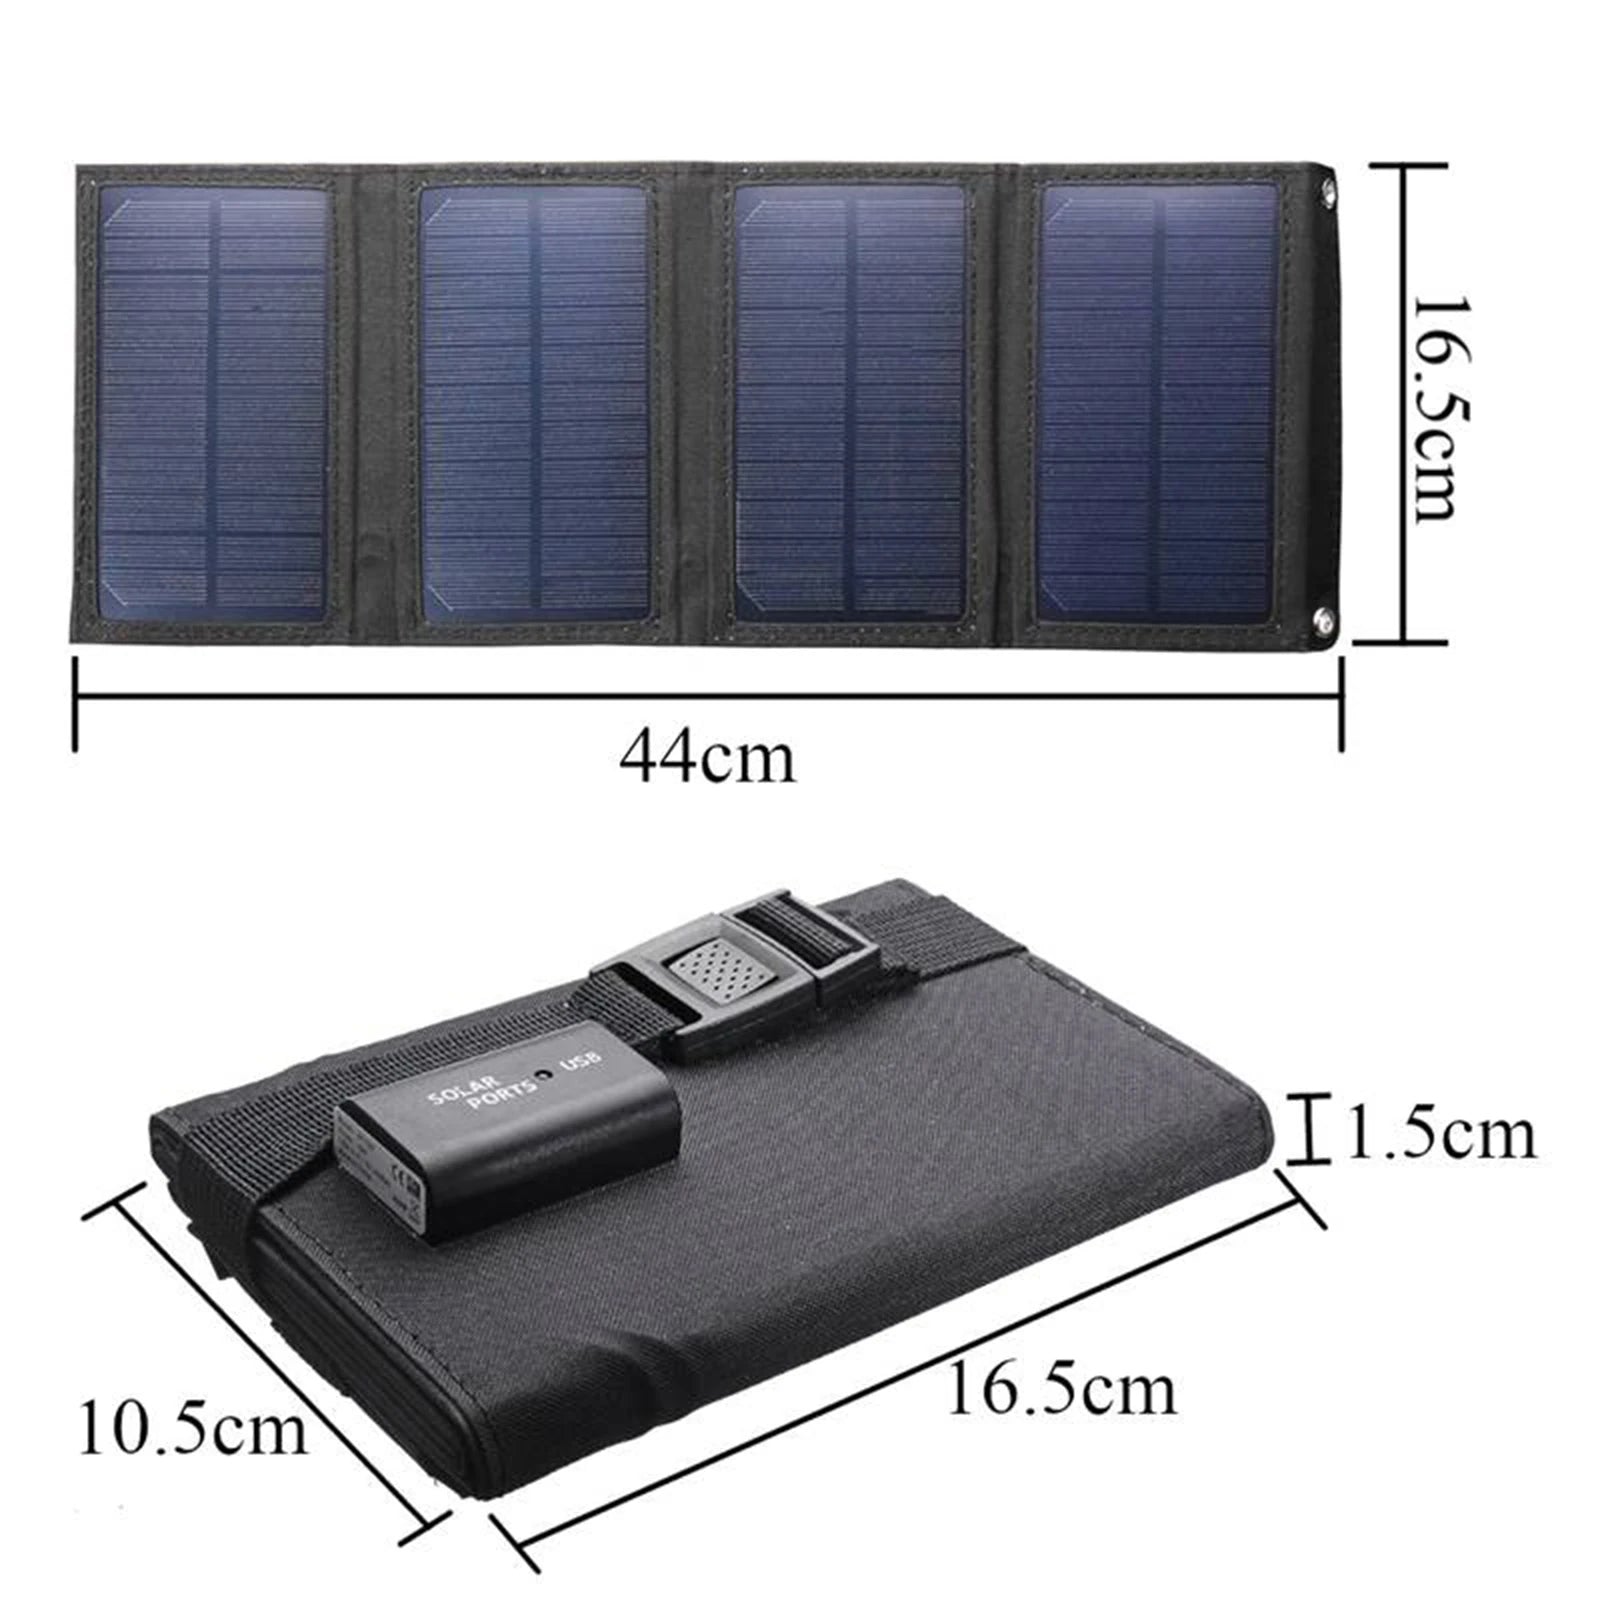 20W Outdoor Foldable Solar Panel, Outdoor dimensions for camping, hiking, or tourism, measuring 44cm x 16.5cm x 10cm.